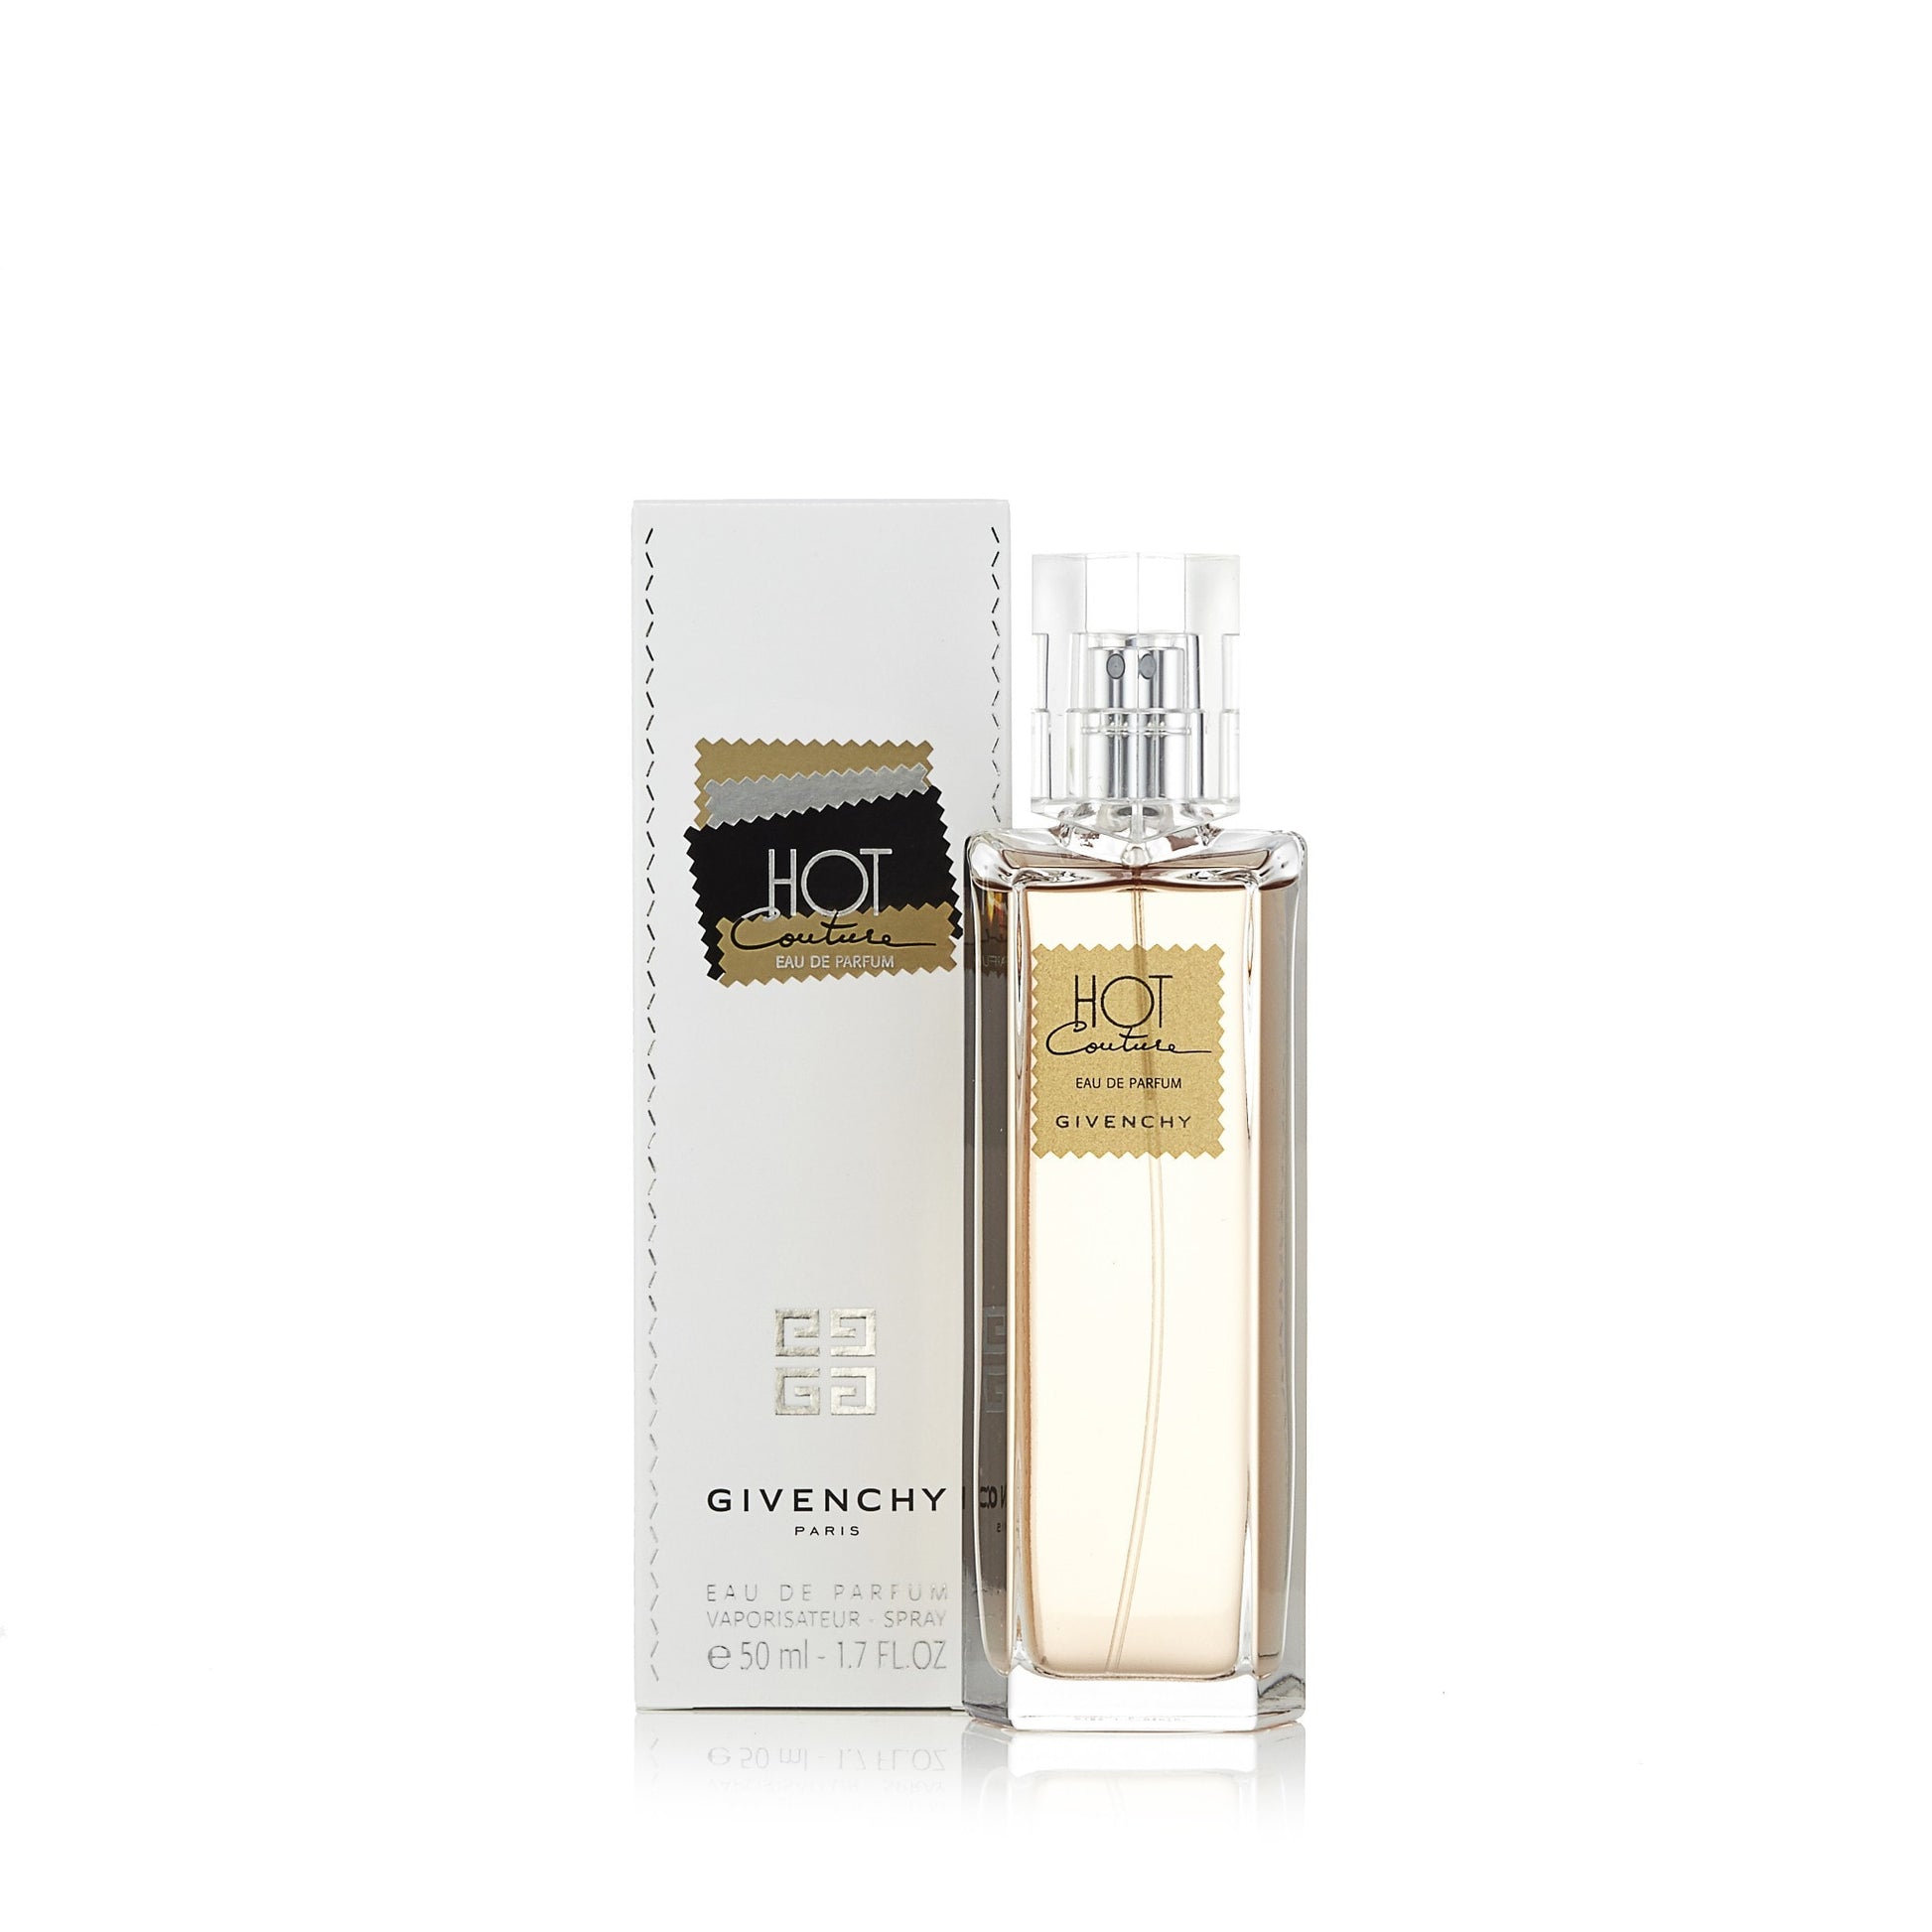 Hot Couture Eau de Parfum Spray for Women by Givenchy, Product image 3